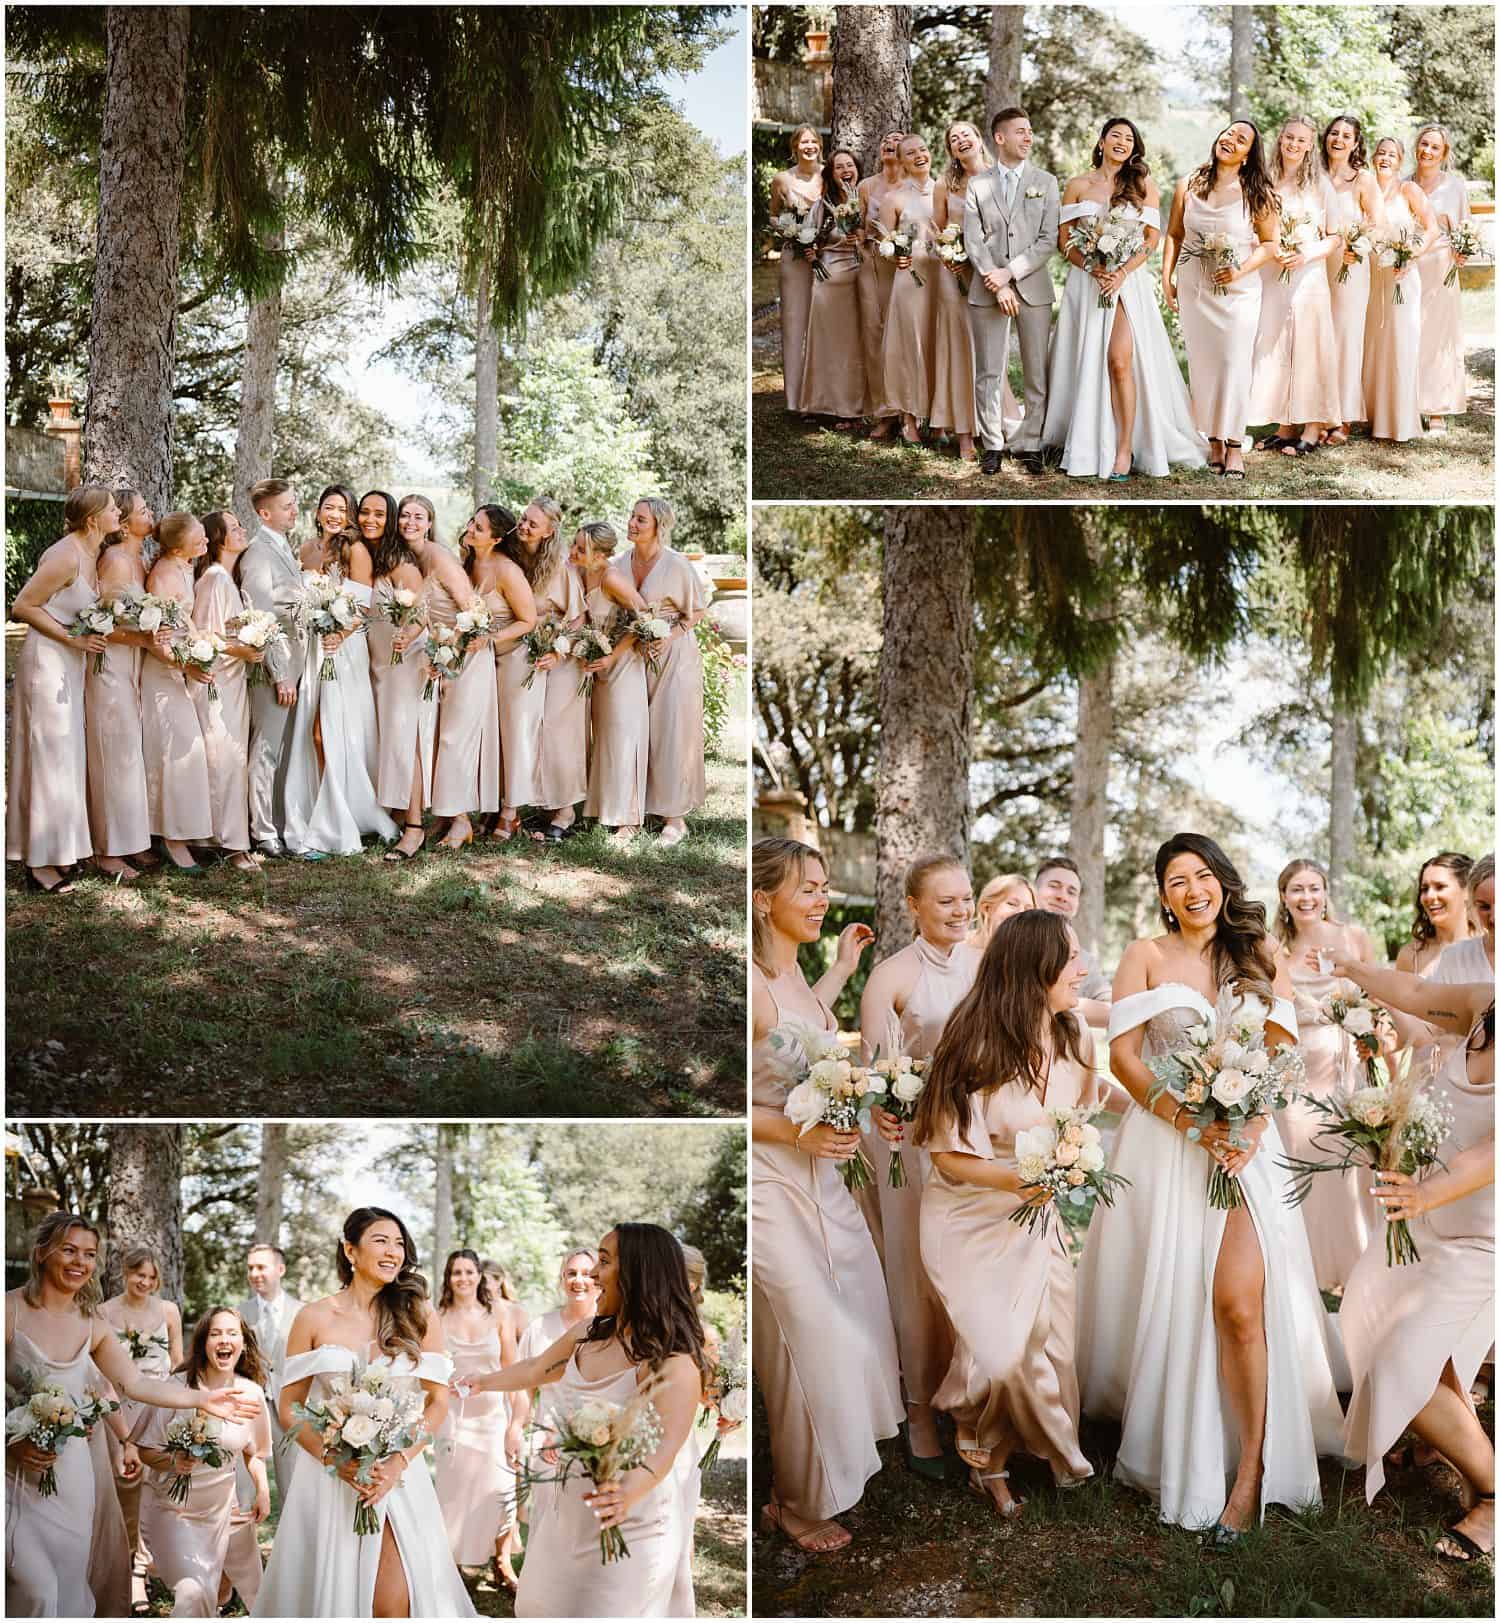 Bridal party formals taken in Tuscany by the destination wedding photographers Ludovica & Valerio